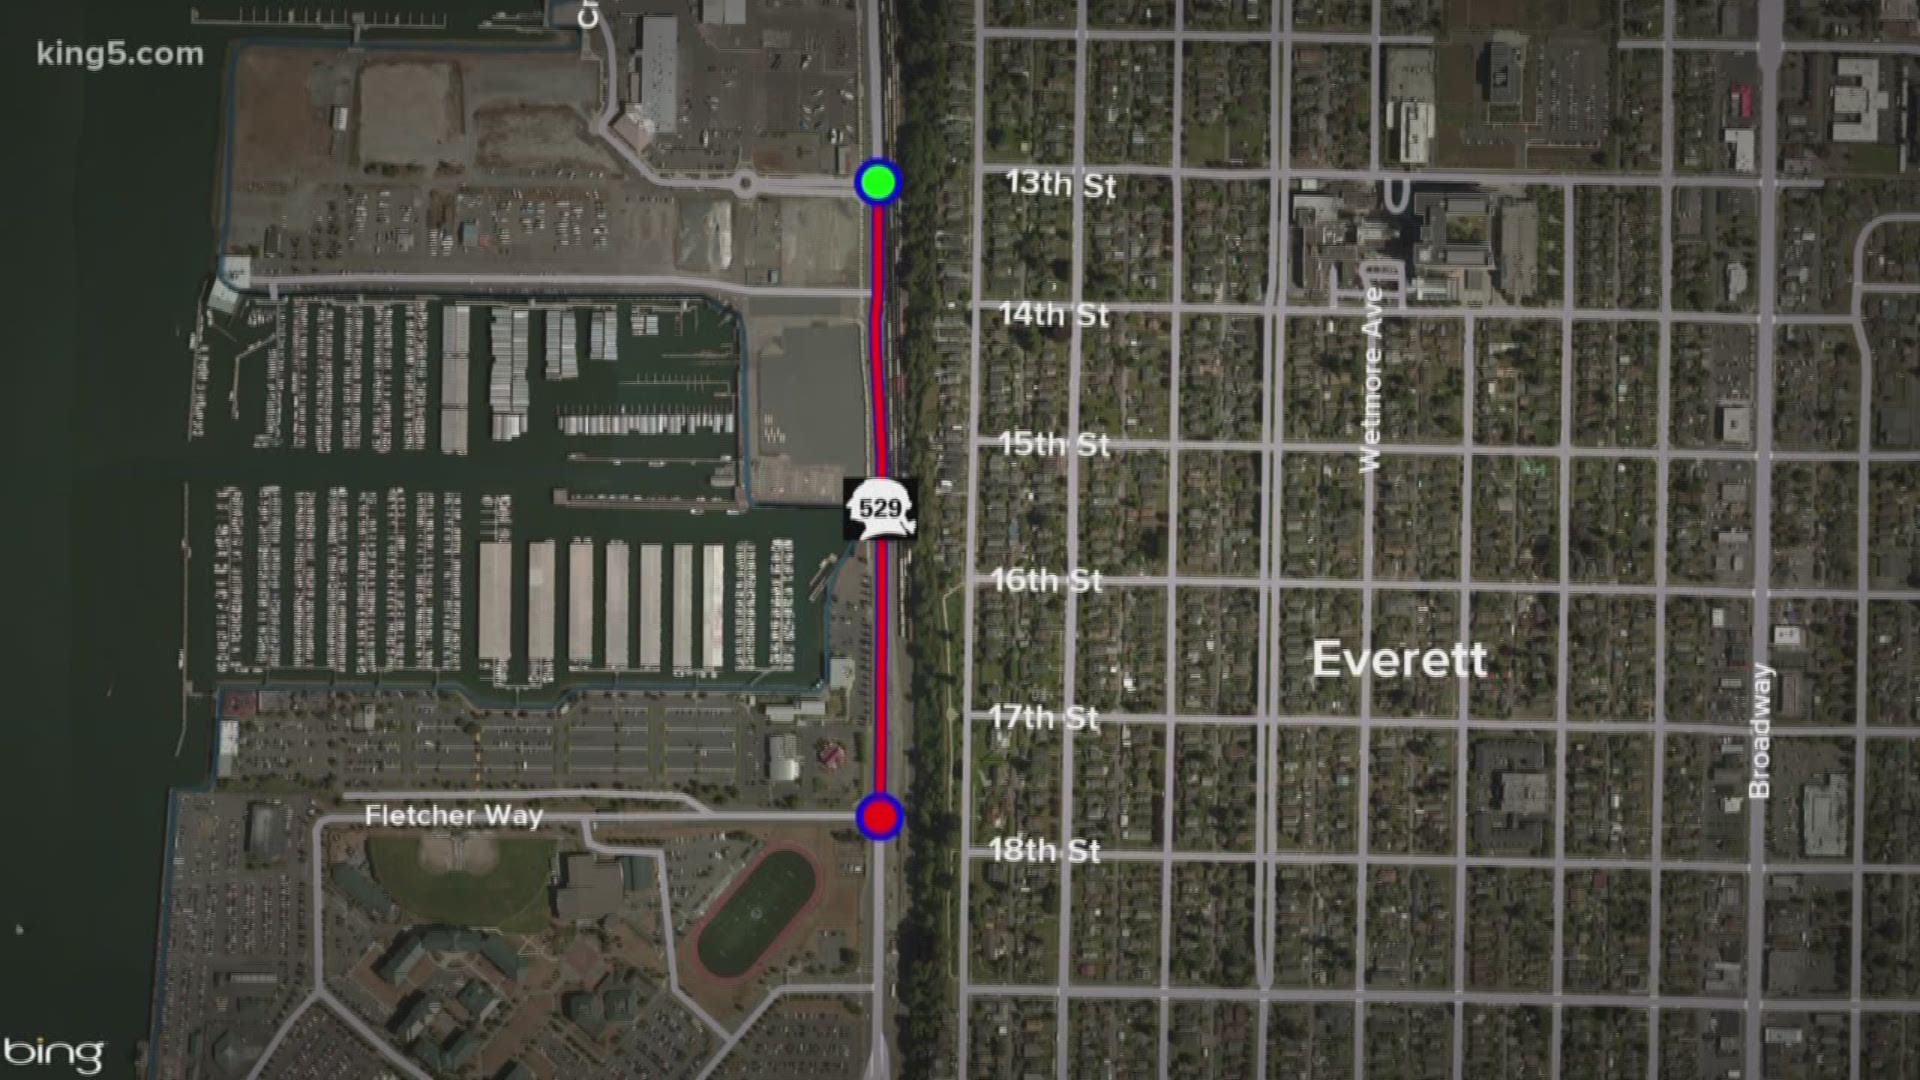 The City of Everett will close all five lanes of West Marine View Drive for 10 days starting tomorrow through Thursday, September 26th.